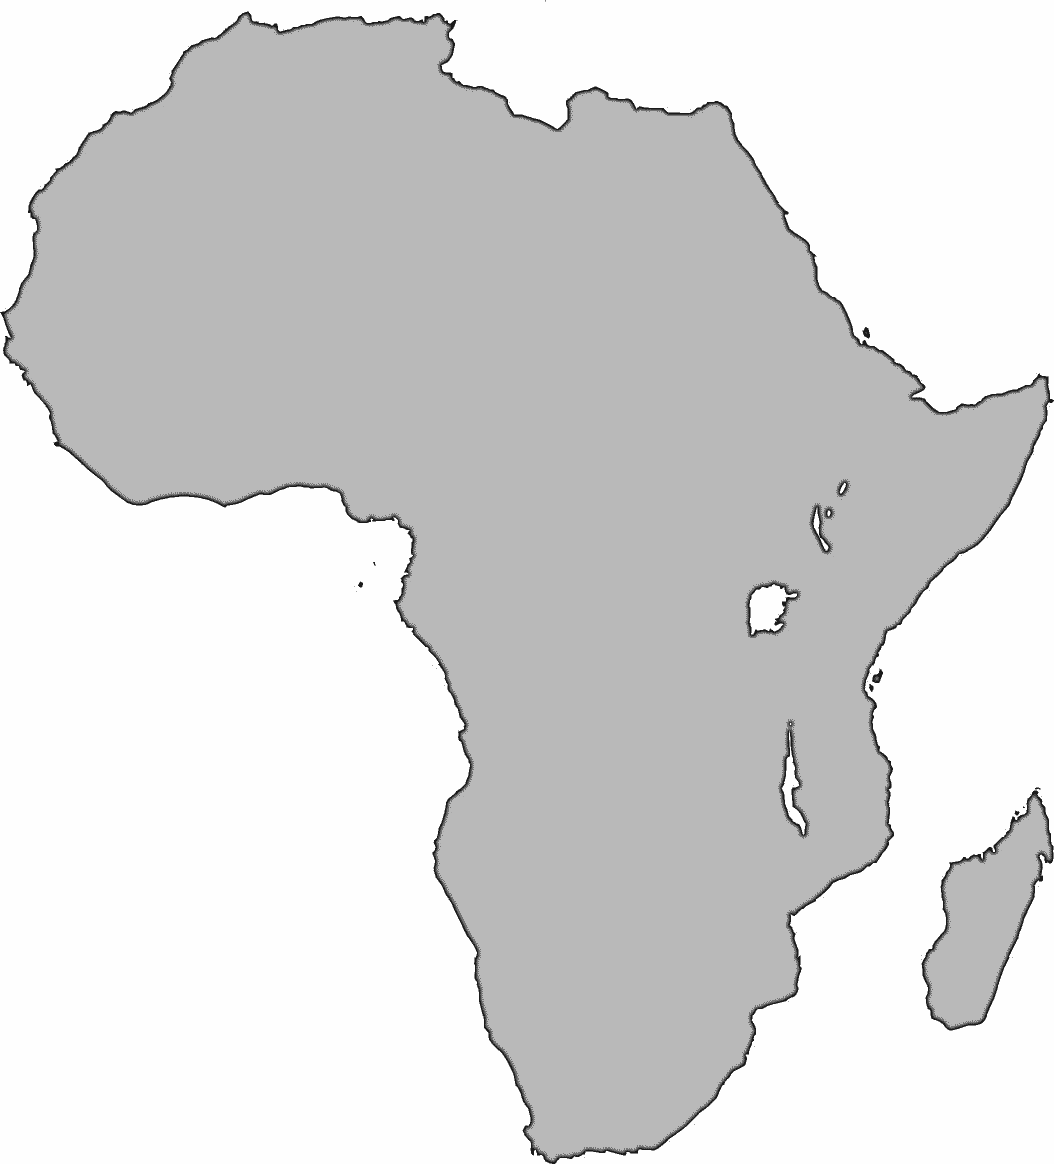 Africa clipart continent africa. Large geography continents png